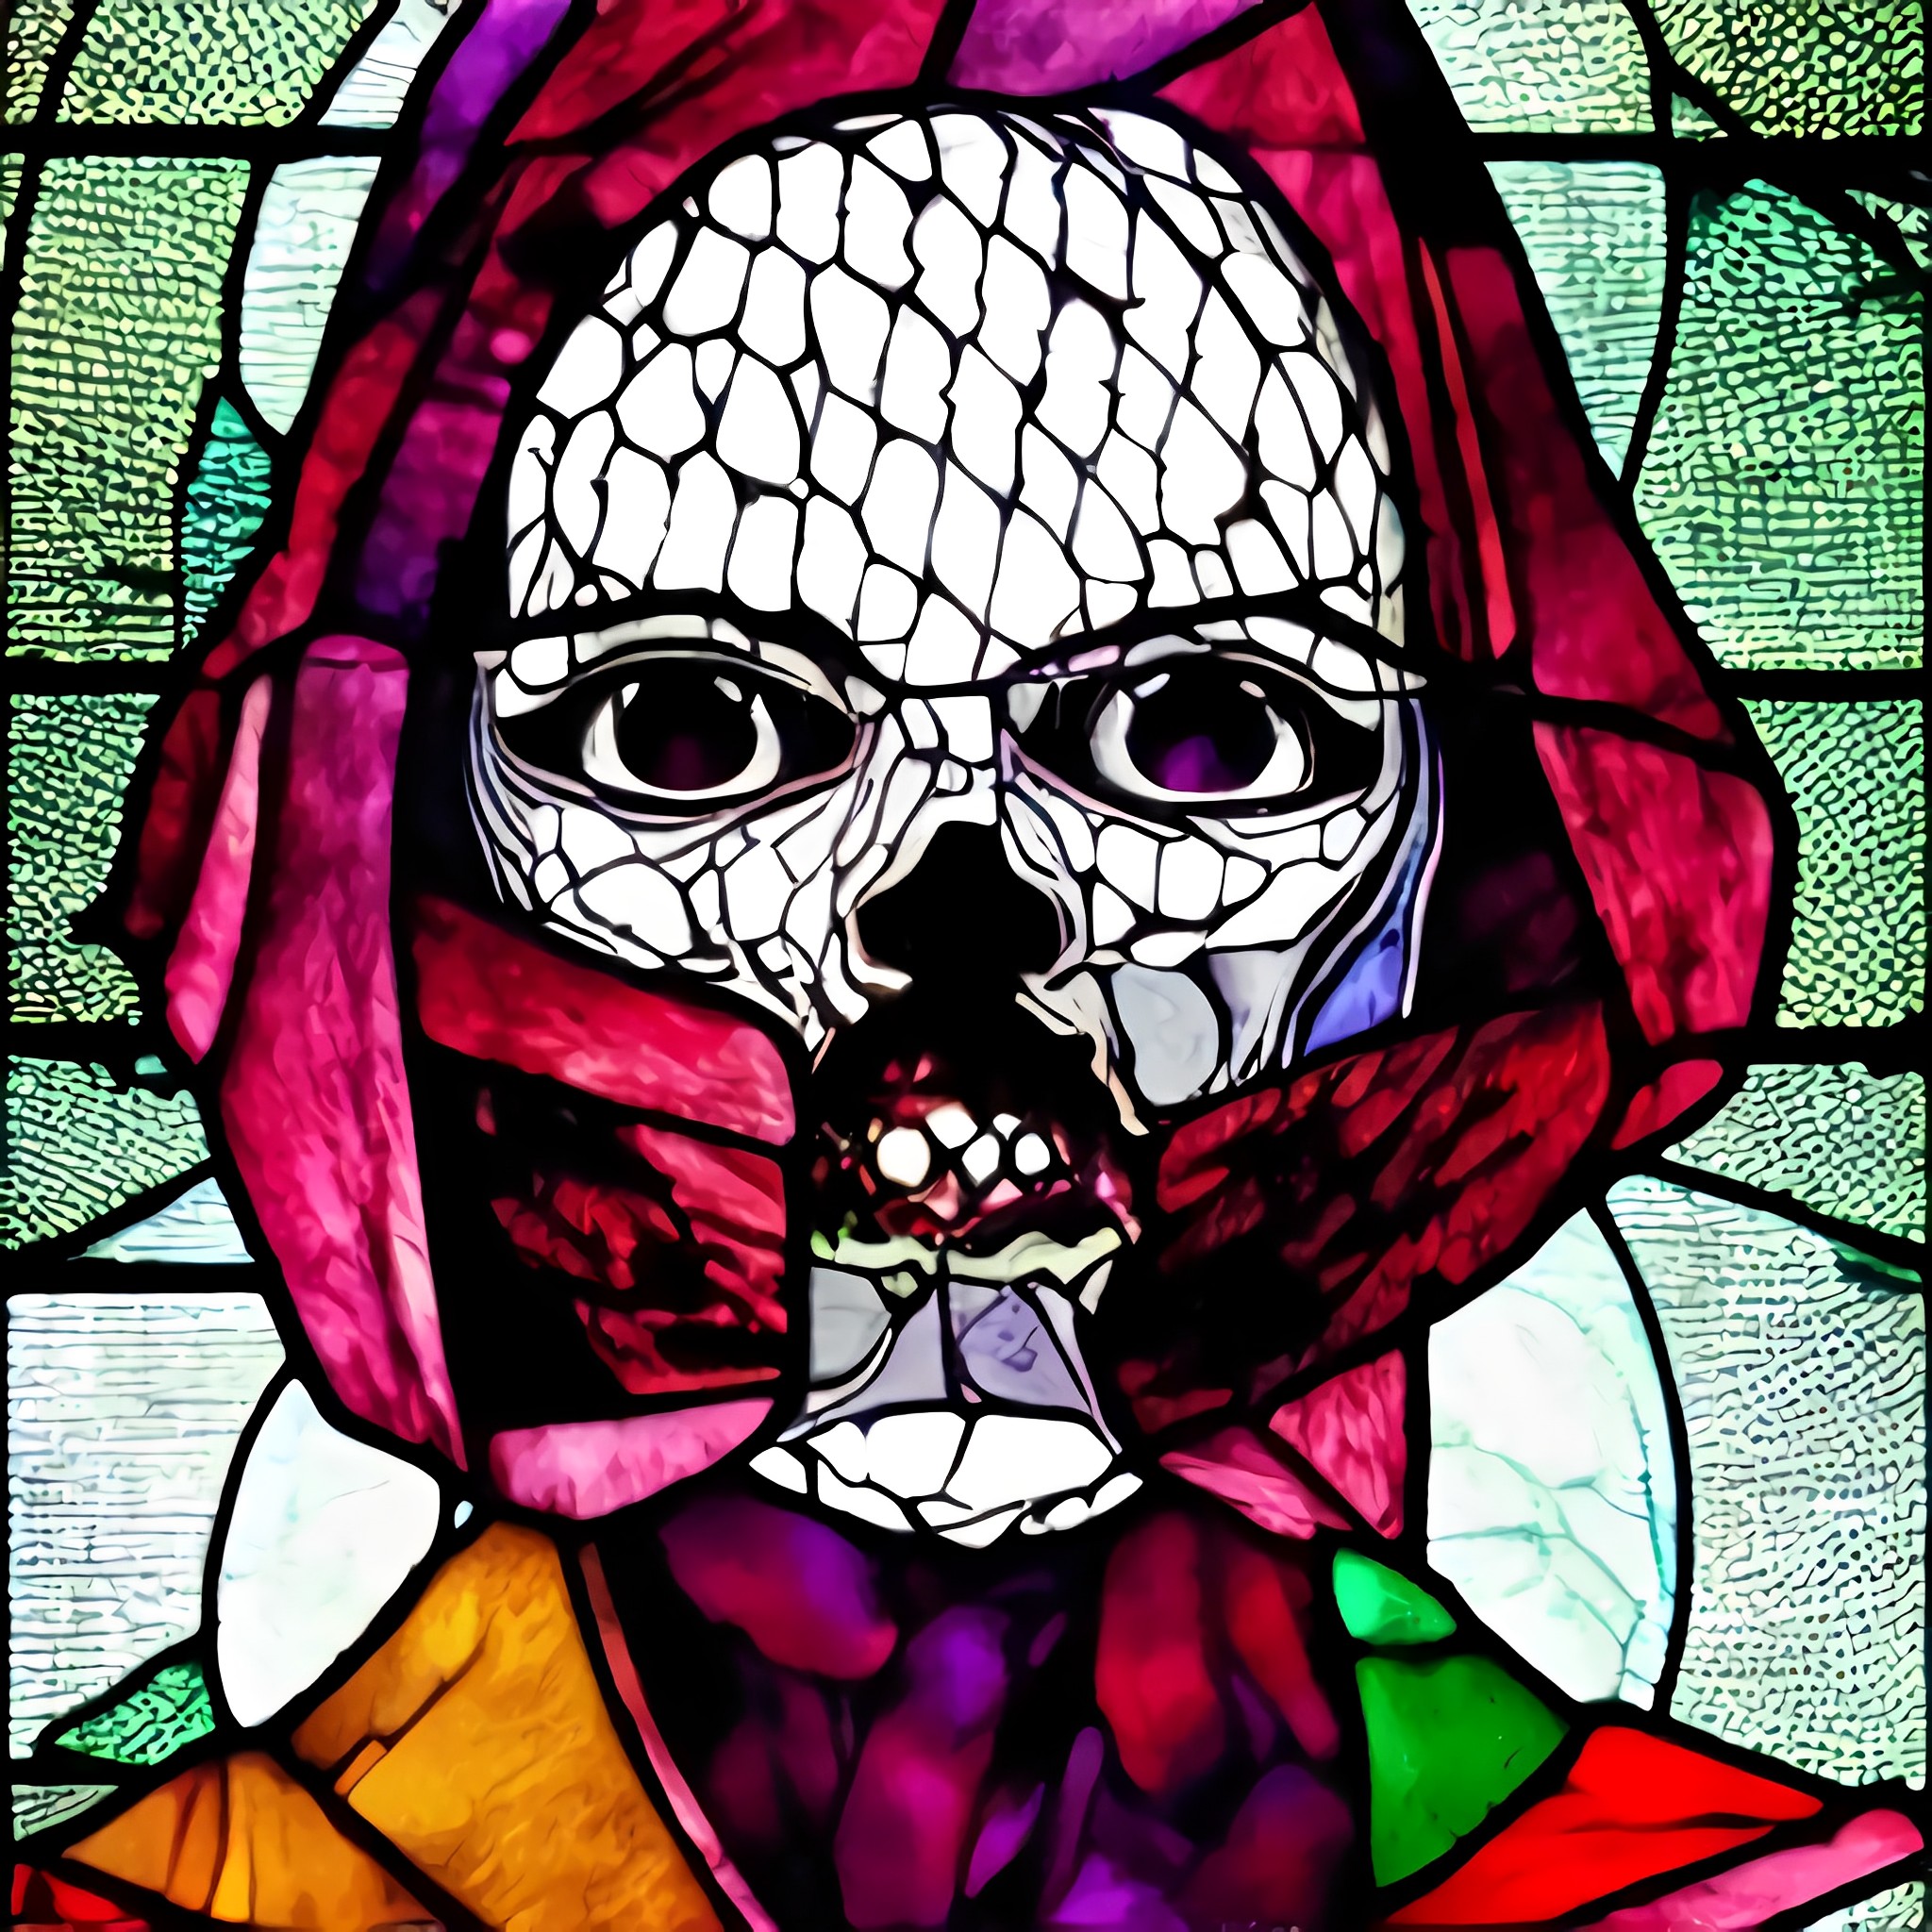 Corrupt stained glass #6